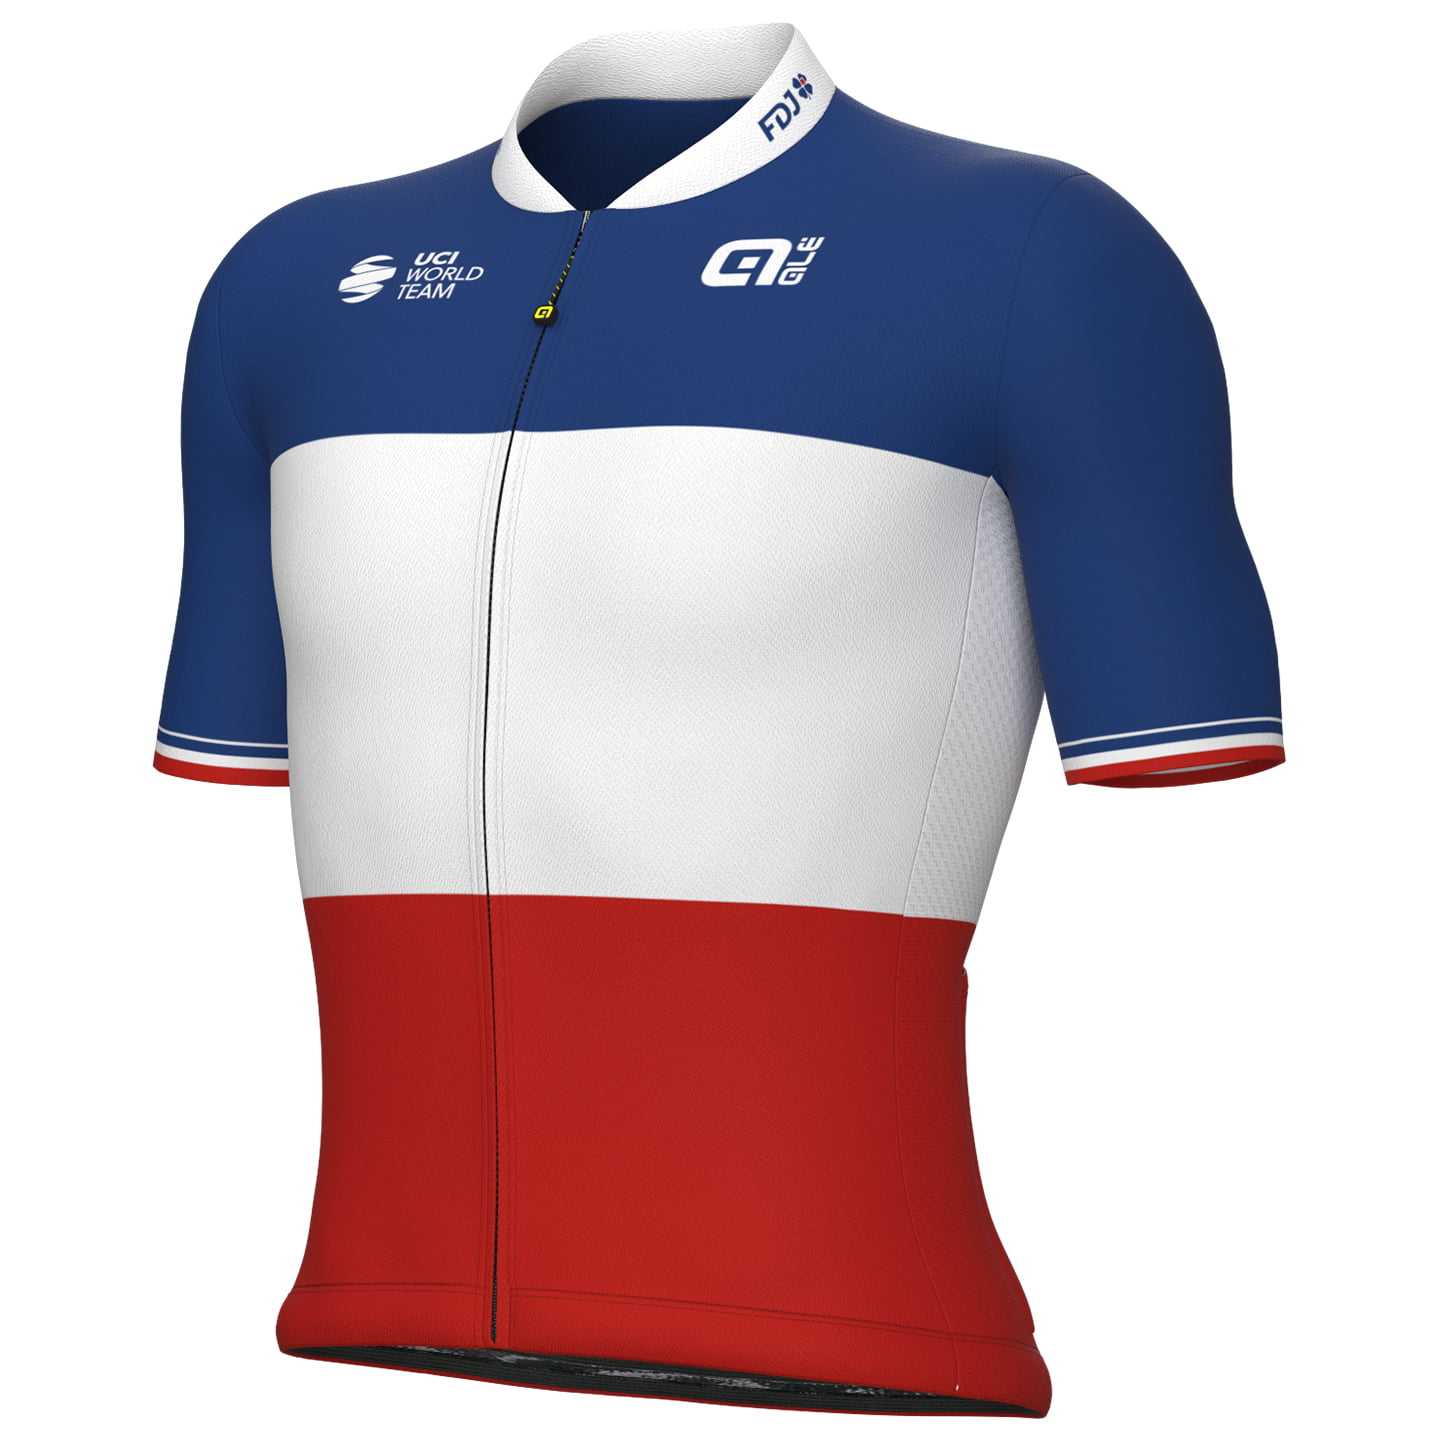 GROUPAMA-FDJ French Champion 2023 Short Sleeve Jersey, for men, size M, Cycle jersey, Cycling clothing